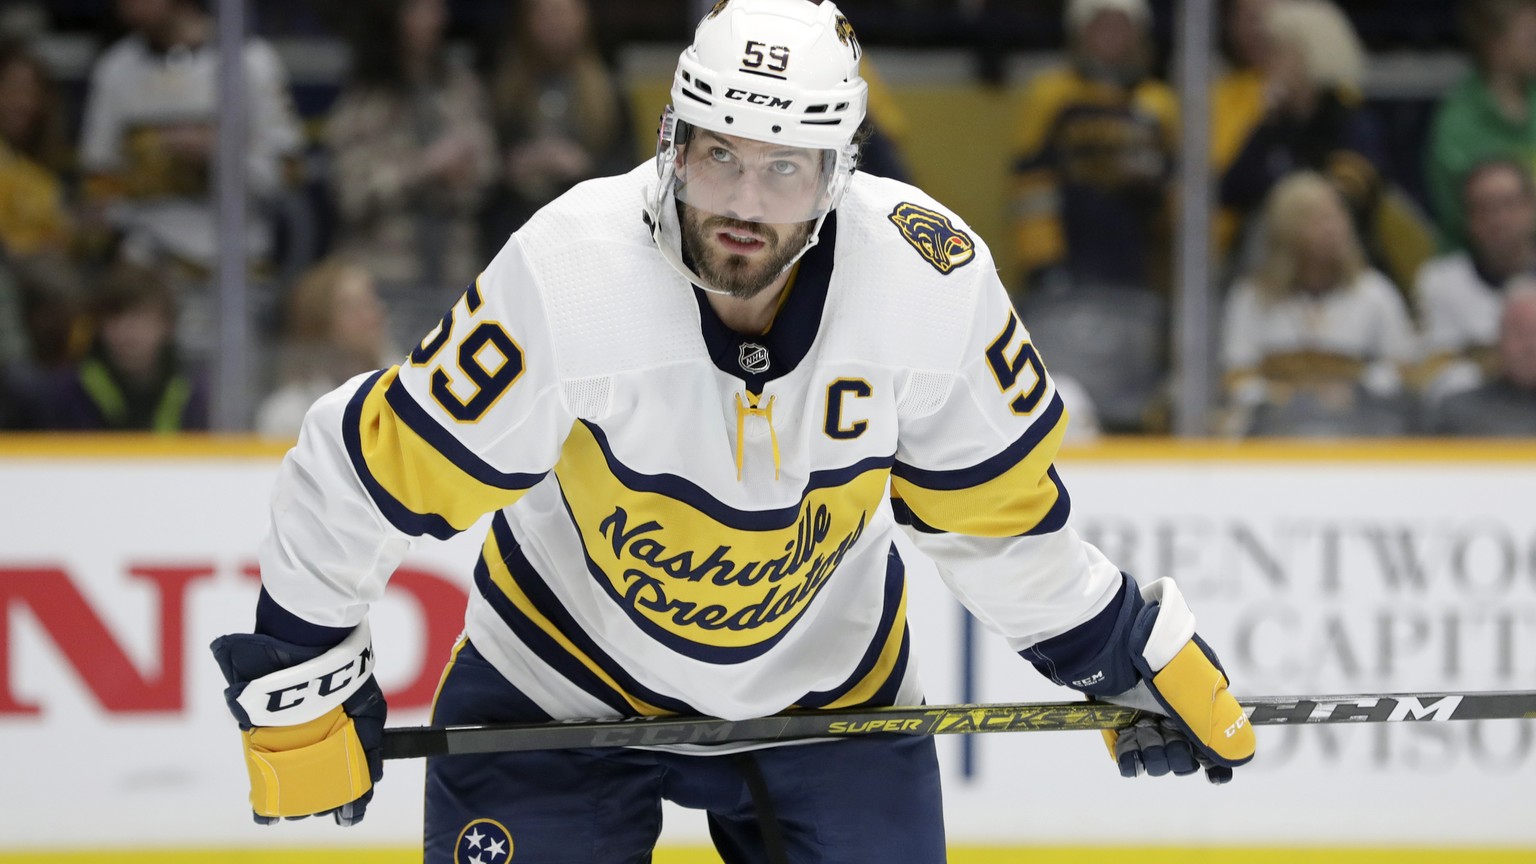 FILE - In this Sunday, Feb. 16, 2020 file photo, Nashville Predators defenseman Roman Josi, of Switzerland, plays against the St. Louis Blues in the third period of an NHL hockey game in Nashville, Te ...